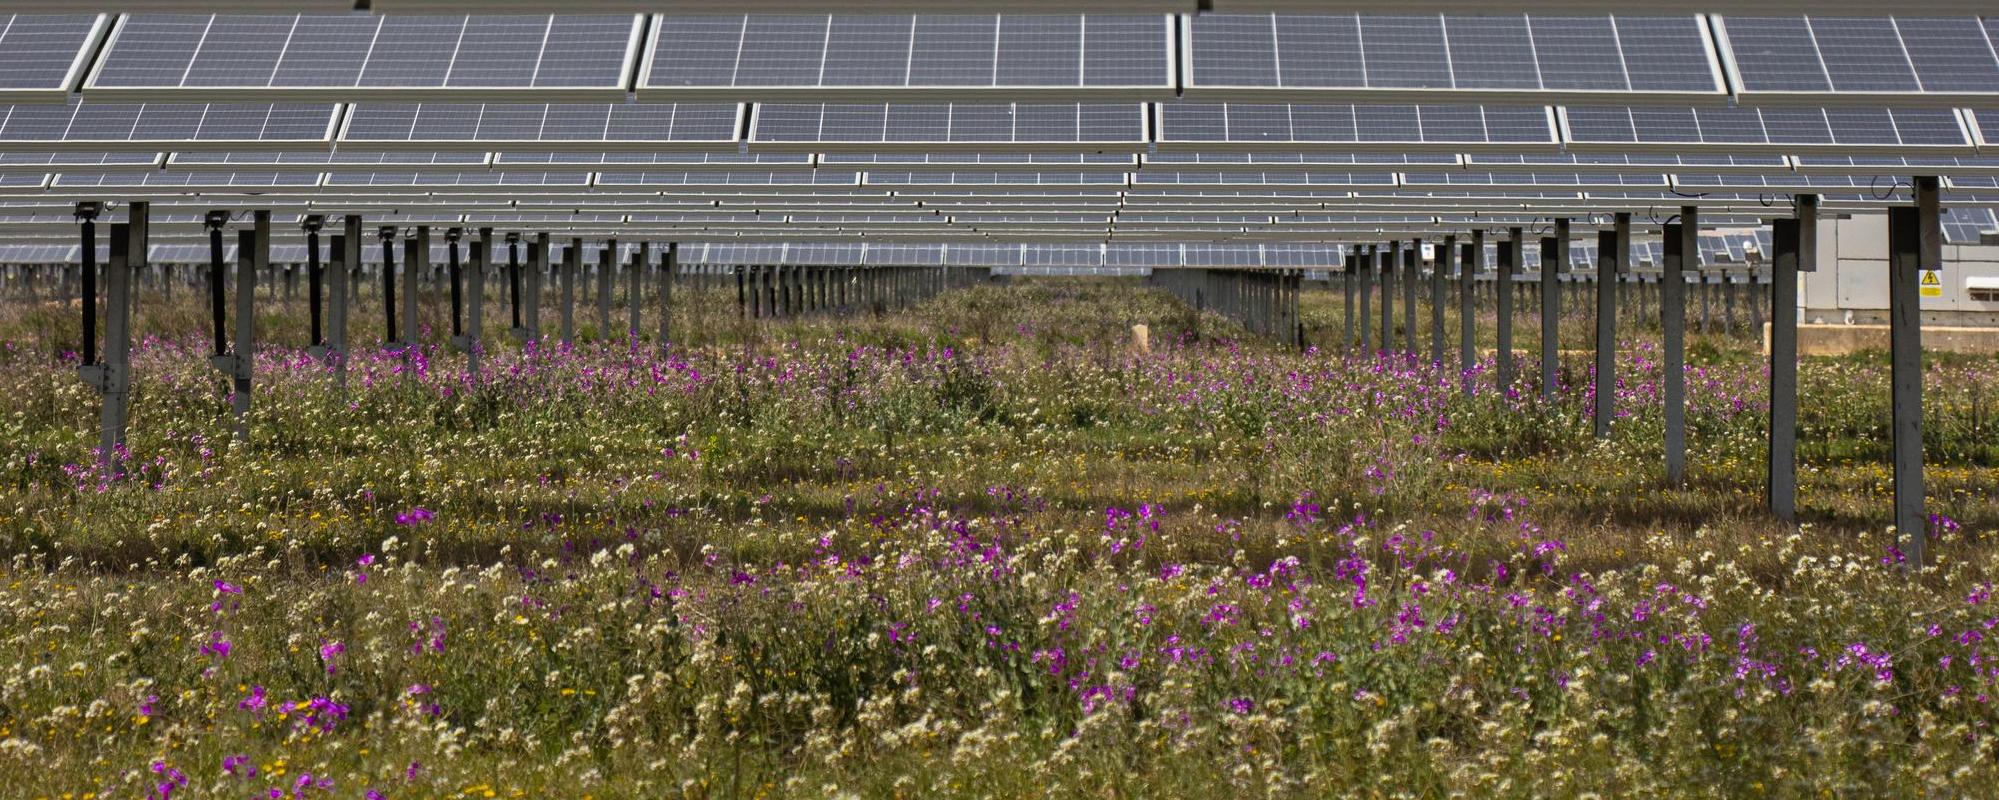 Purple and white flowers growing beneath solar panels